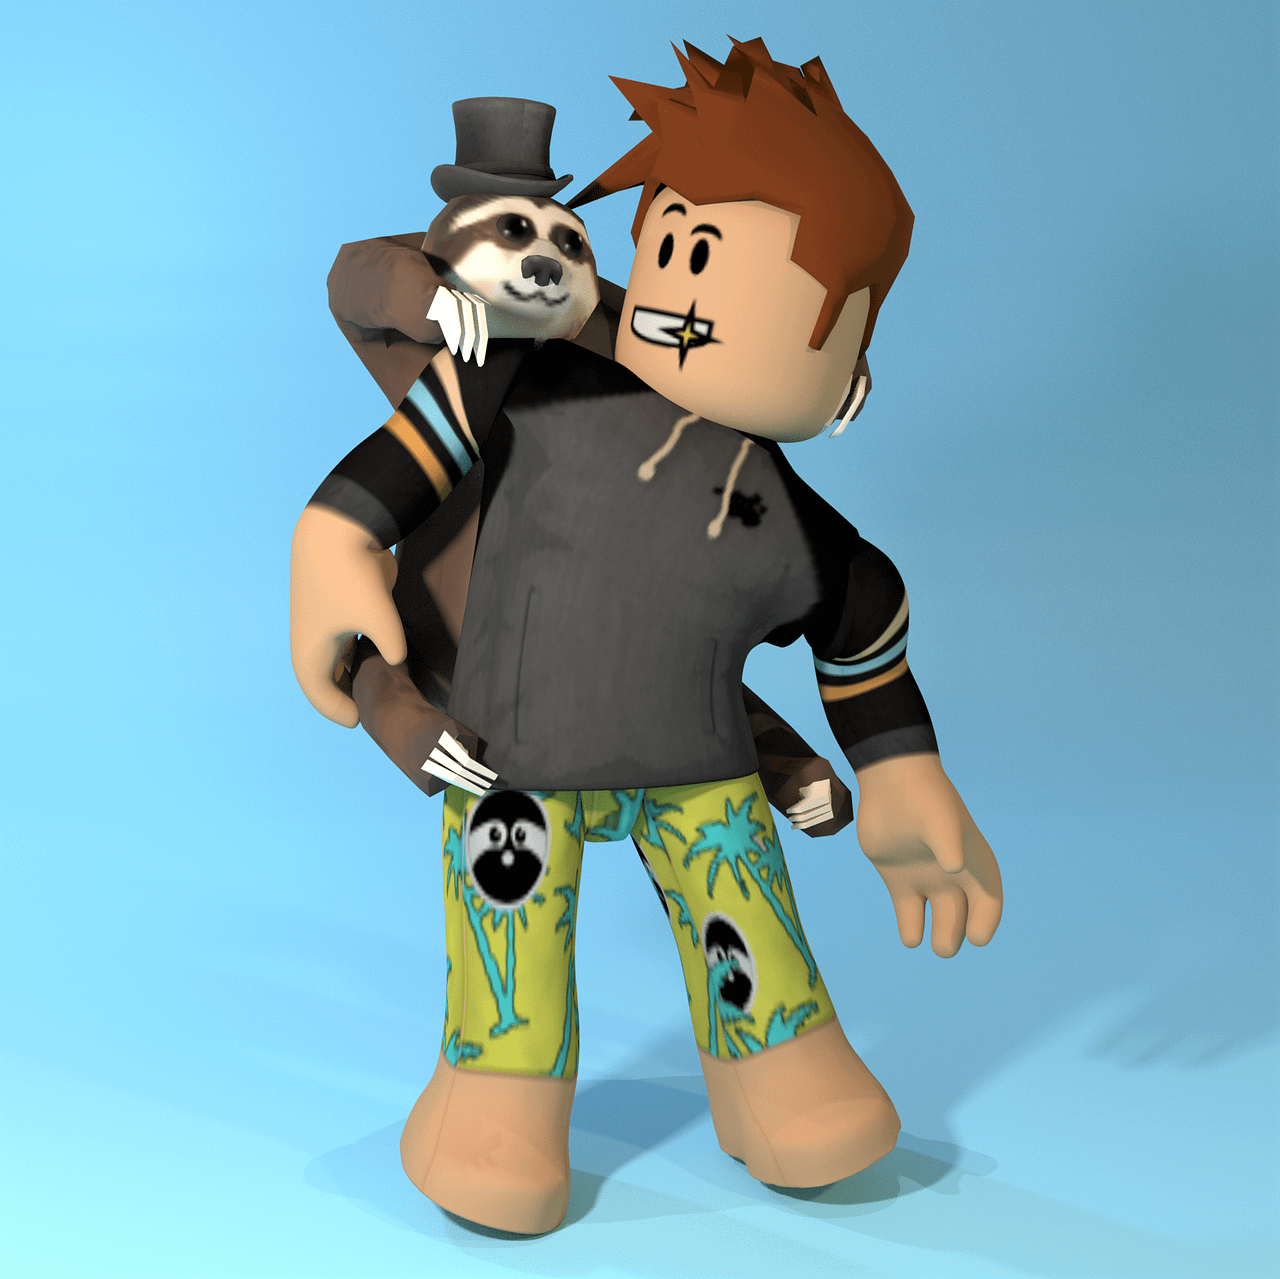 How To Make A Roblox Gfx Scene With Blender Renderguide Com - how to make a roblox character